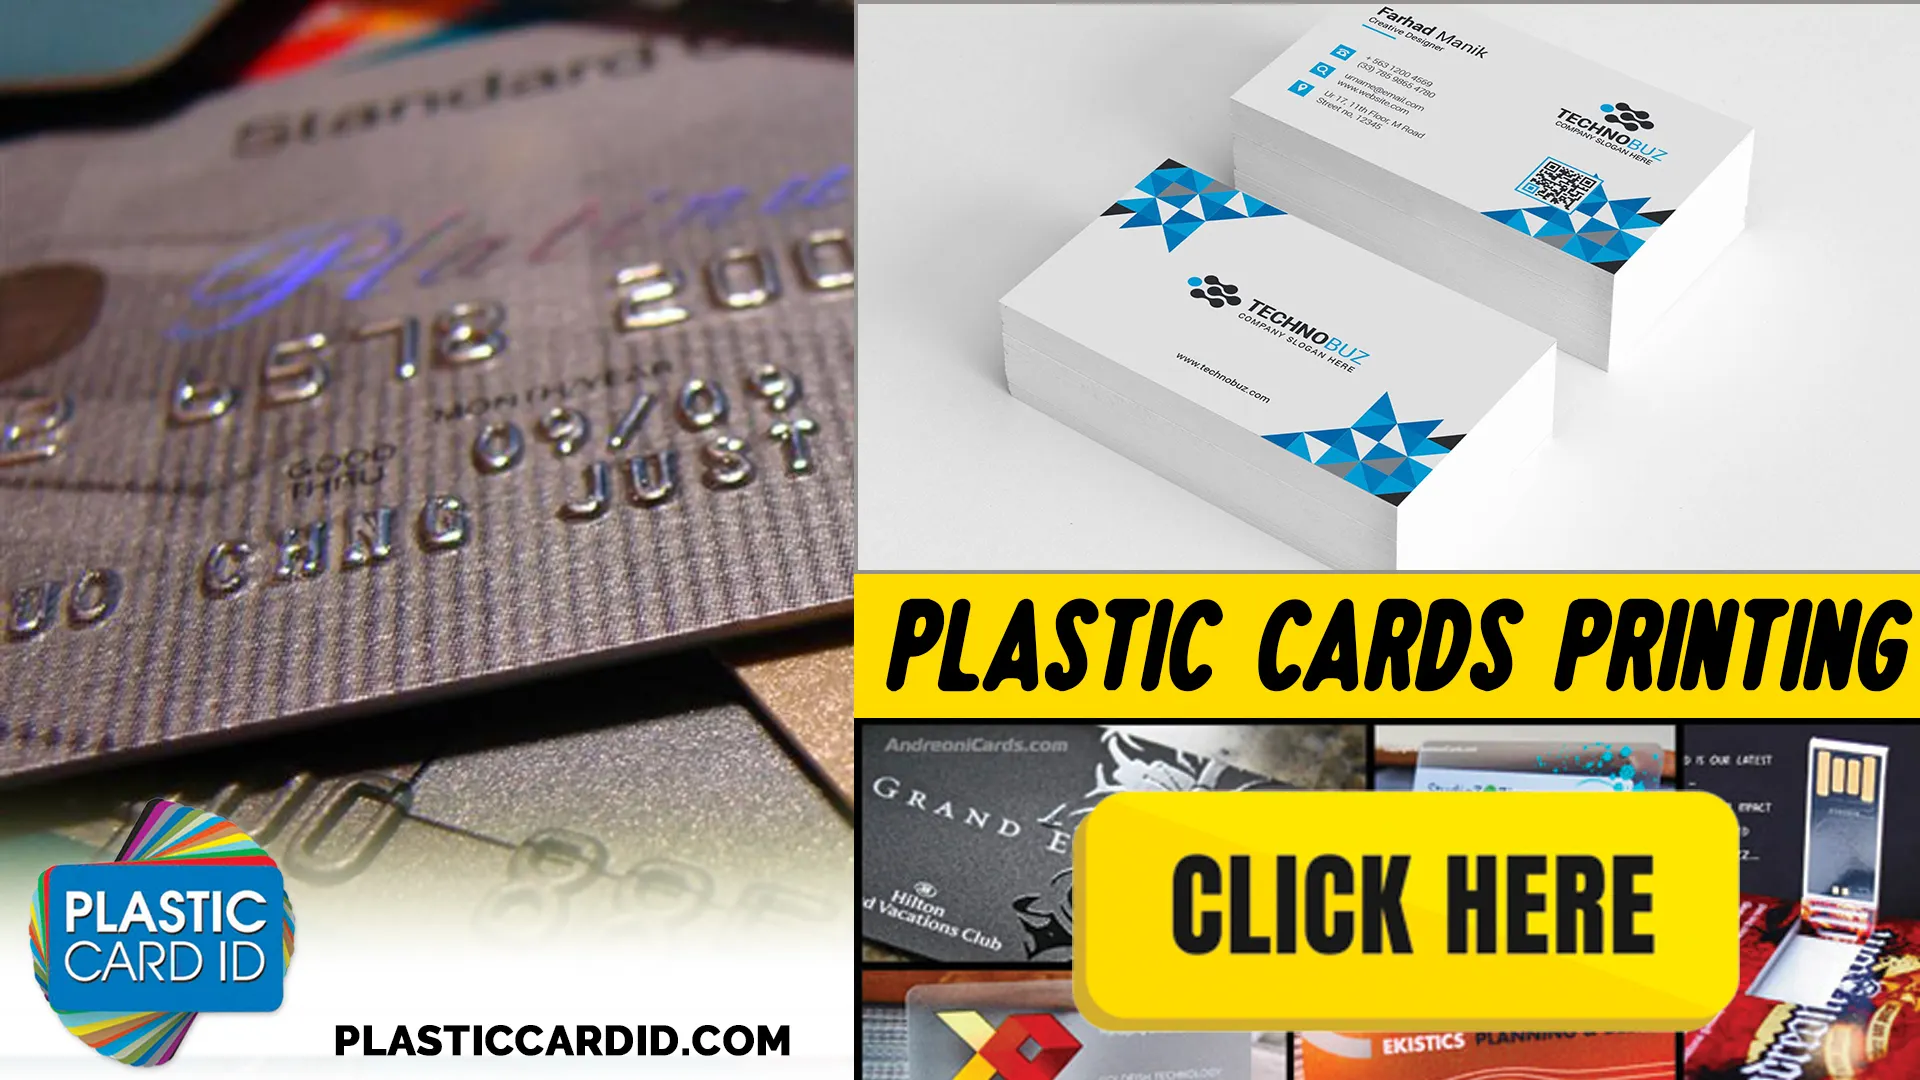 The Green Choice: Plastic Card ID
's Commitment to Sustainability